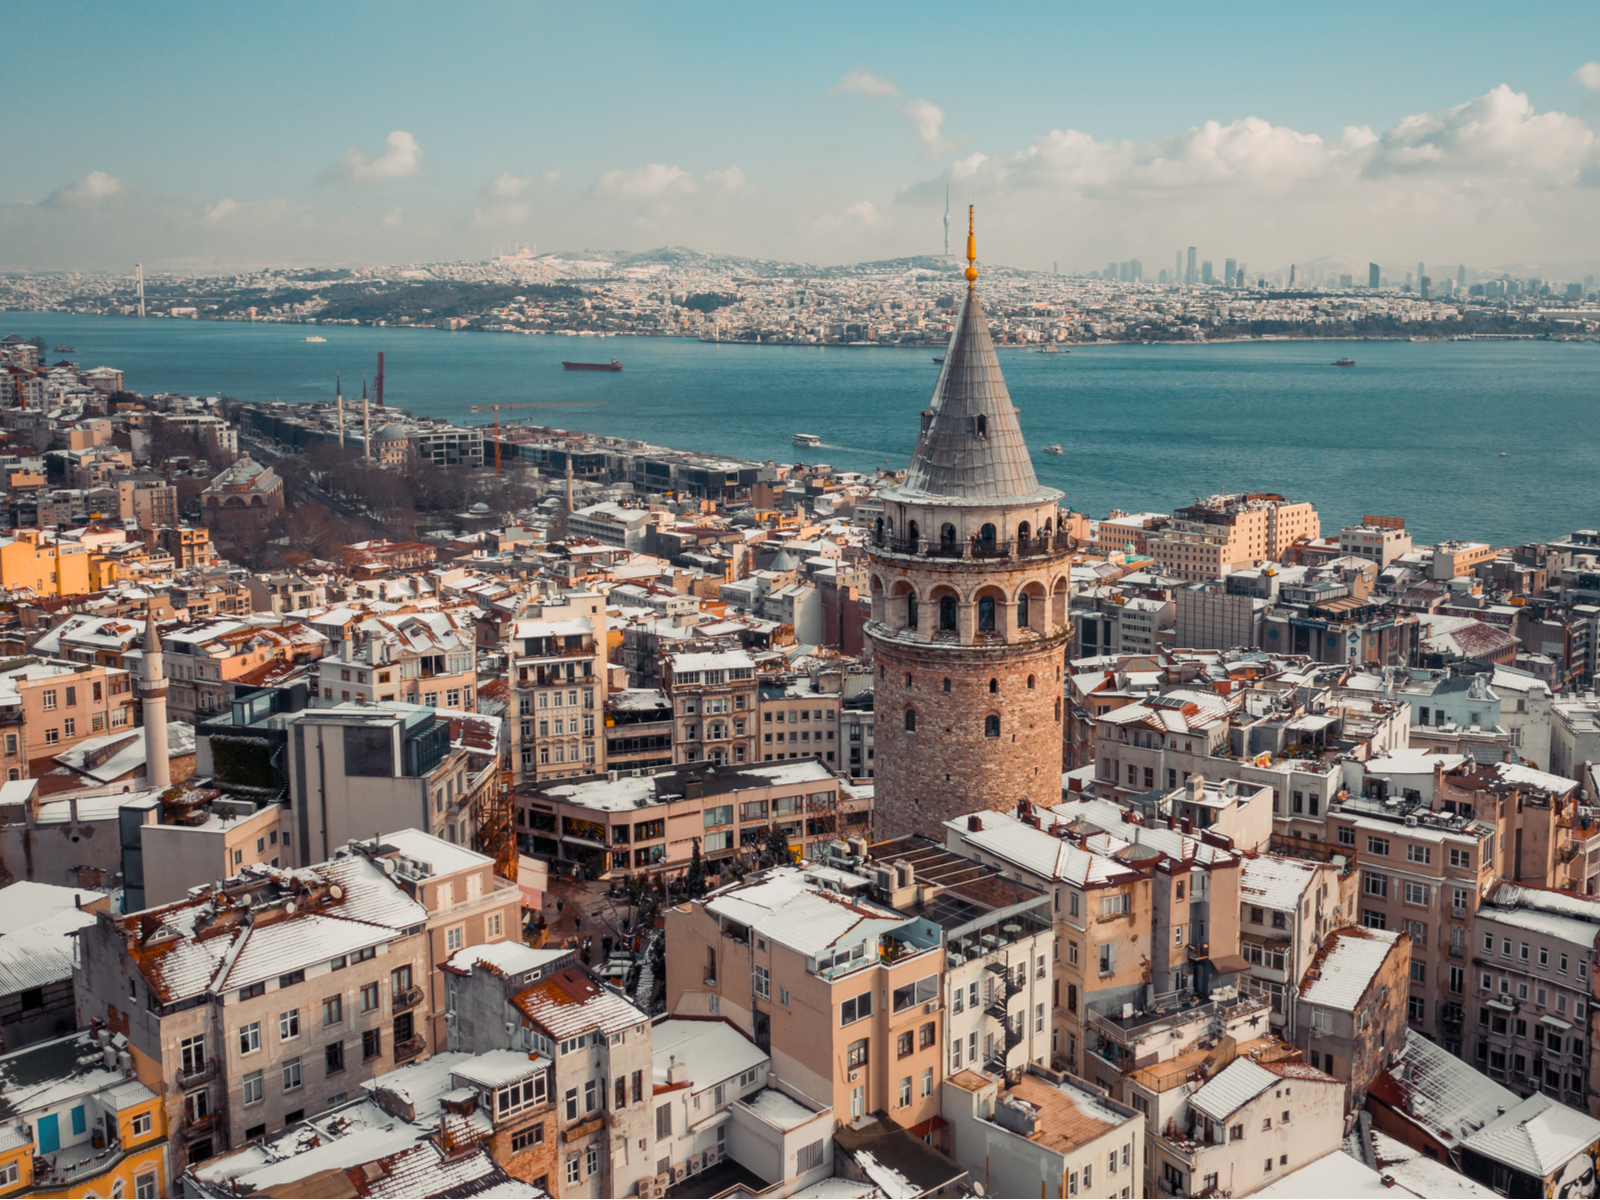 Winter shot from Istanbul at Galata Tower during the cheapest time to visit Turkey